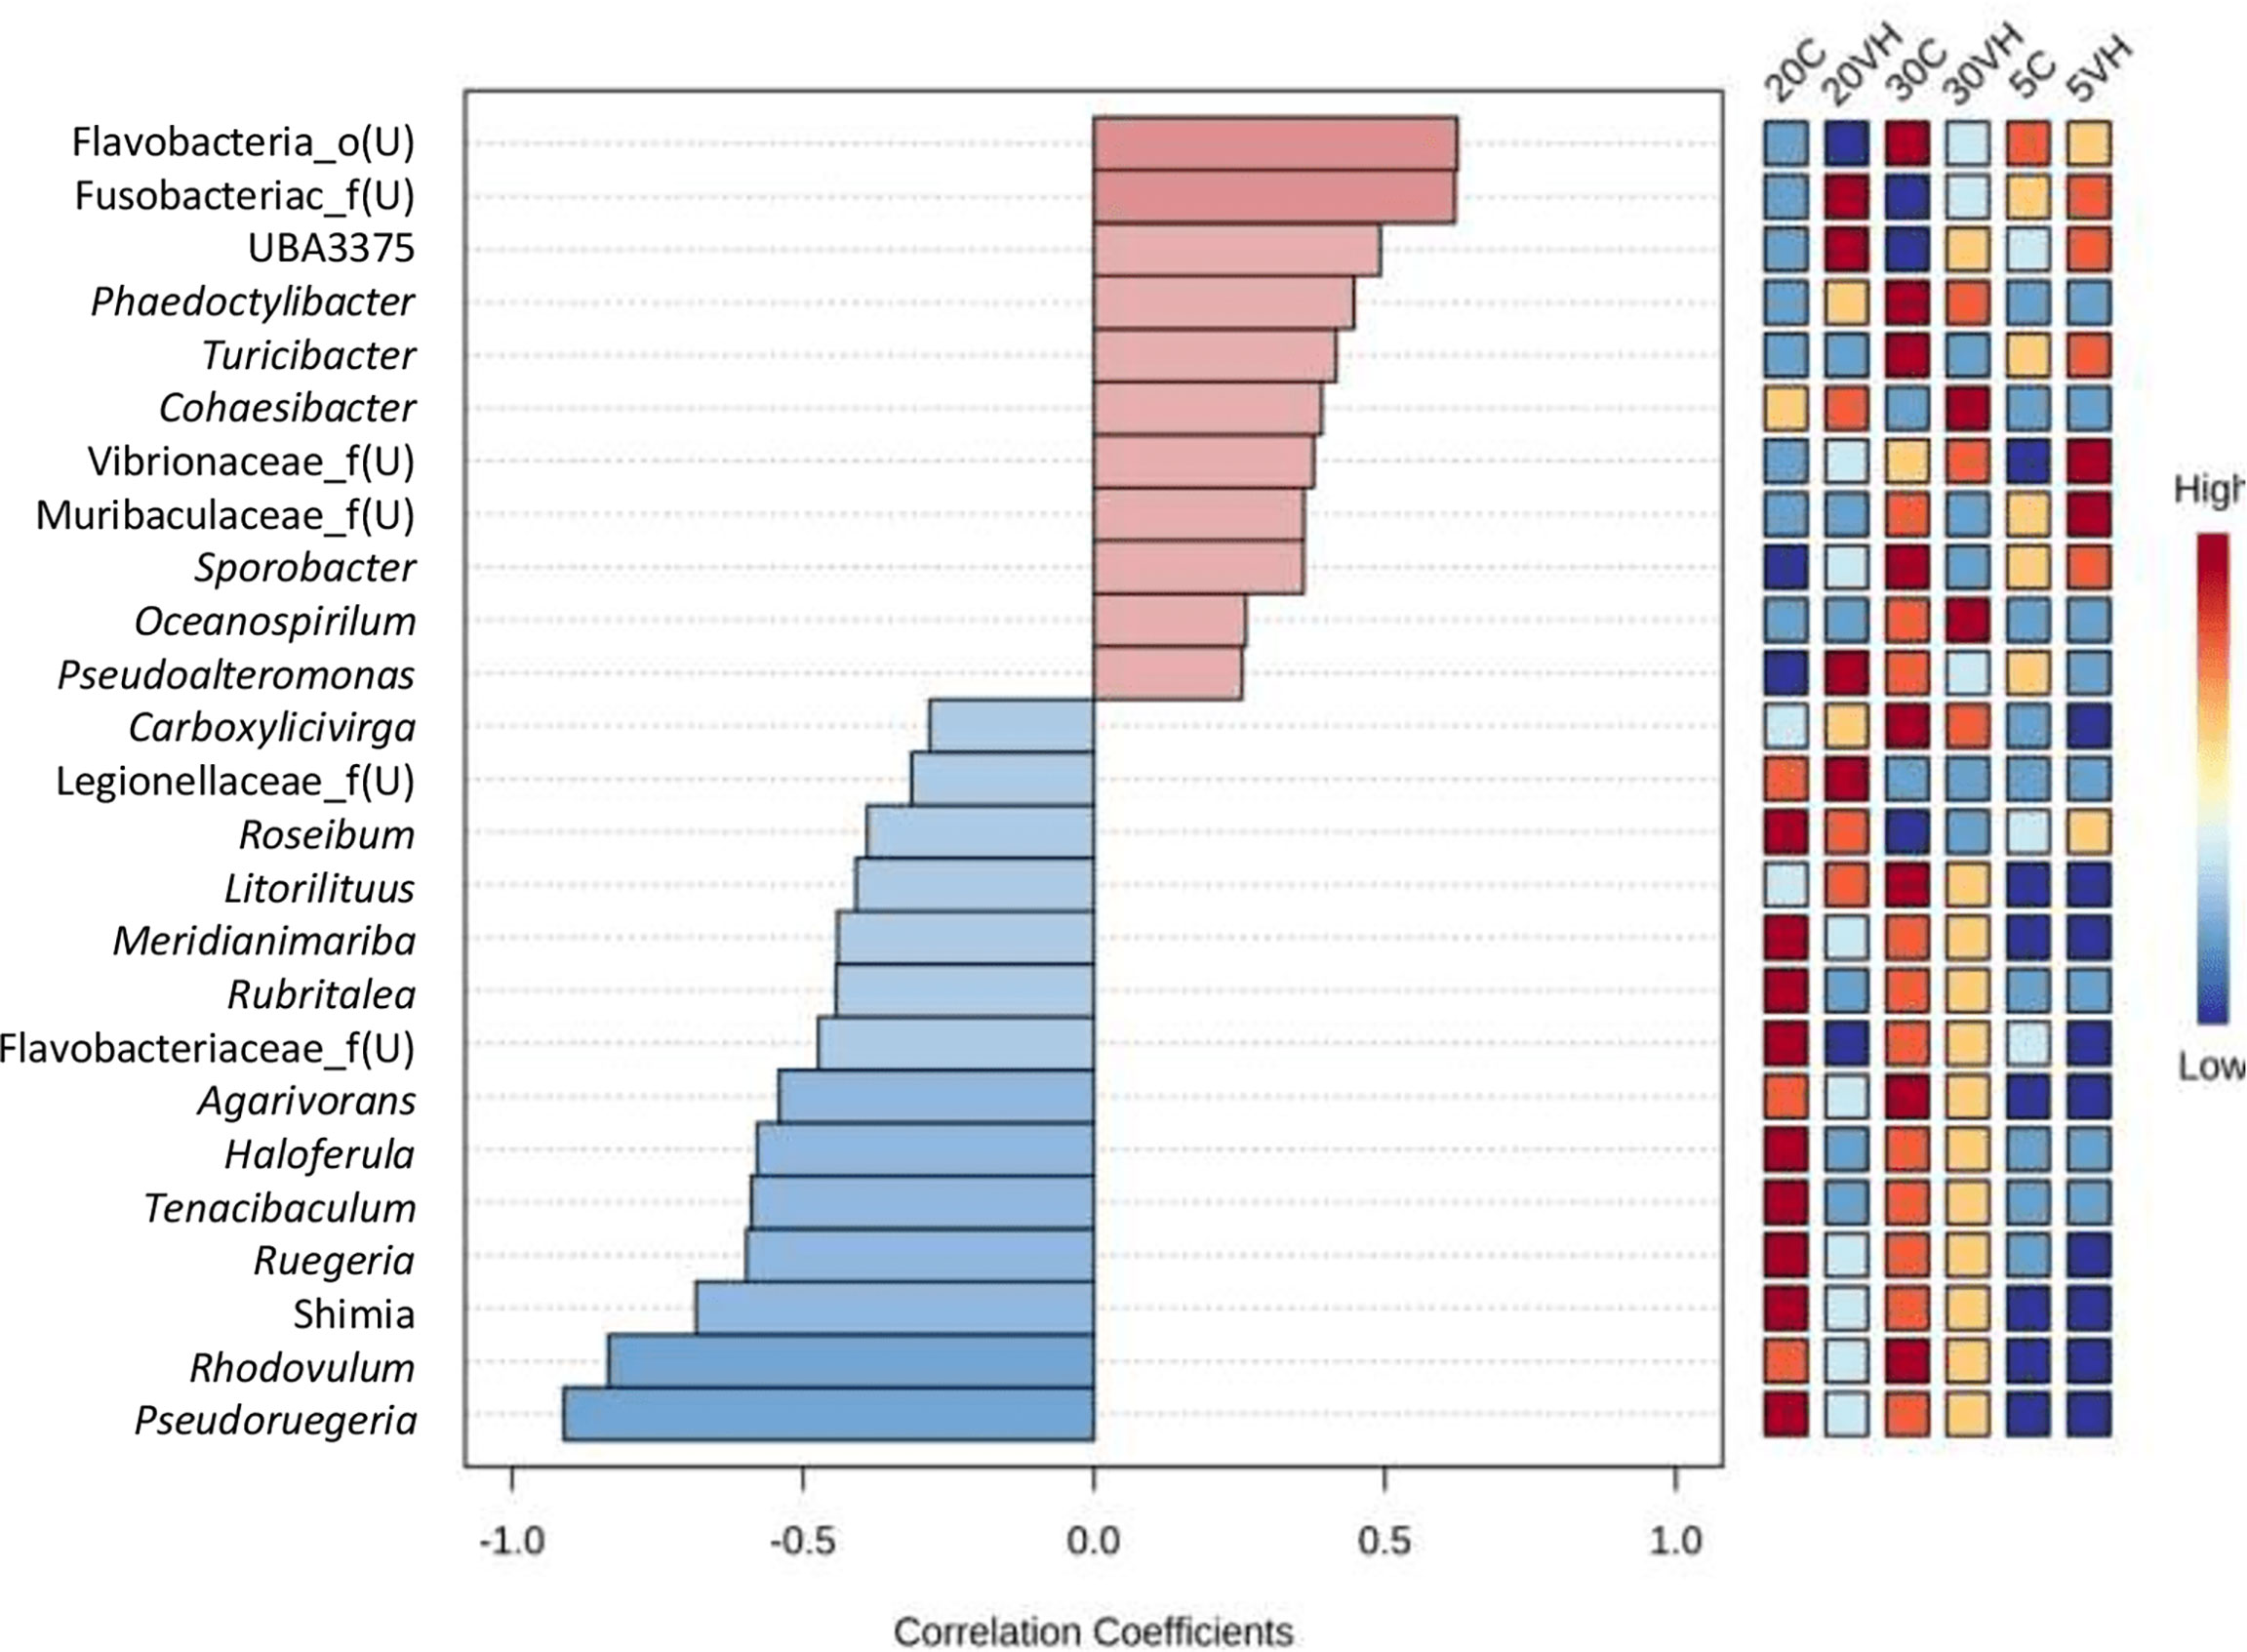 Frontiers  Understanding the effects of salinity and Vibrio harveyi on the  gut microbiota profiles of Litopenaeus vannamei